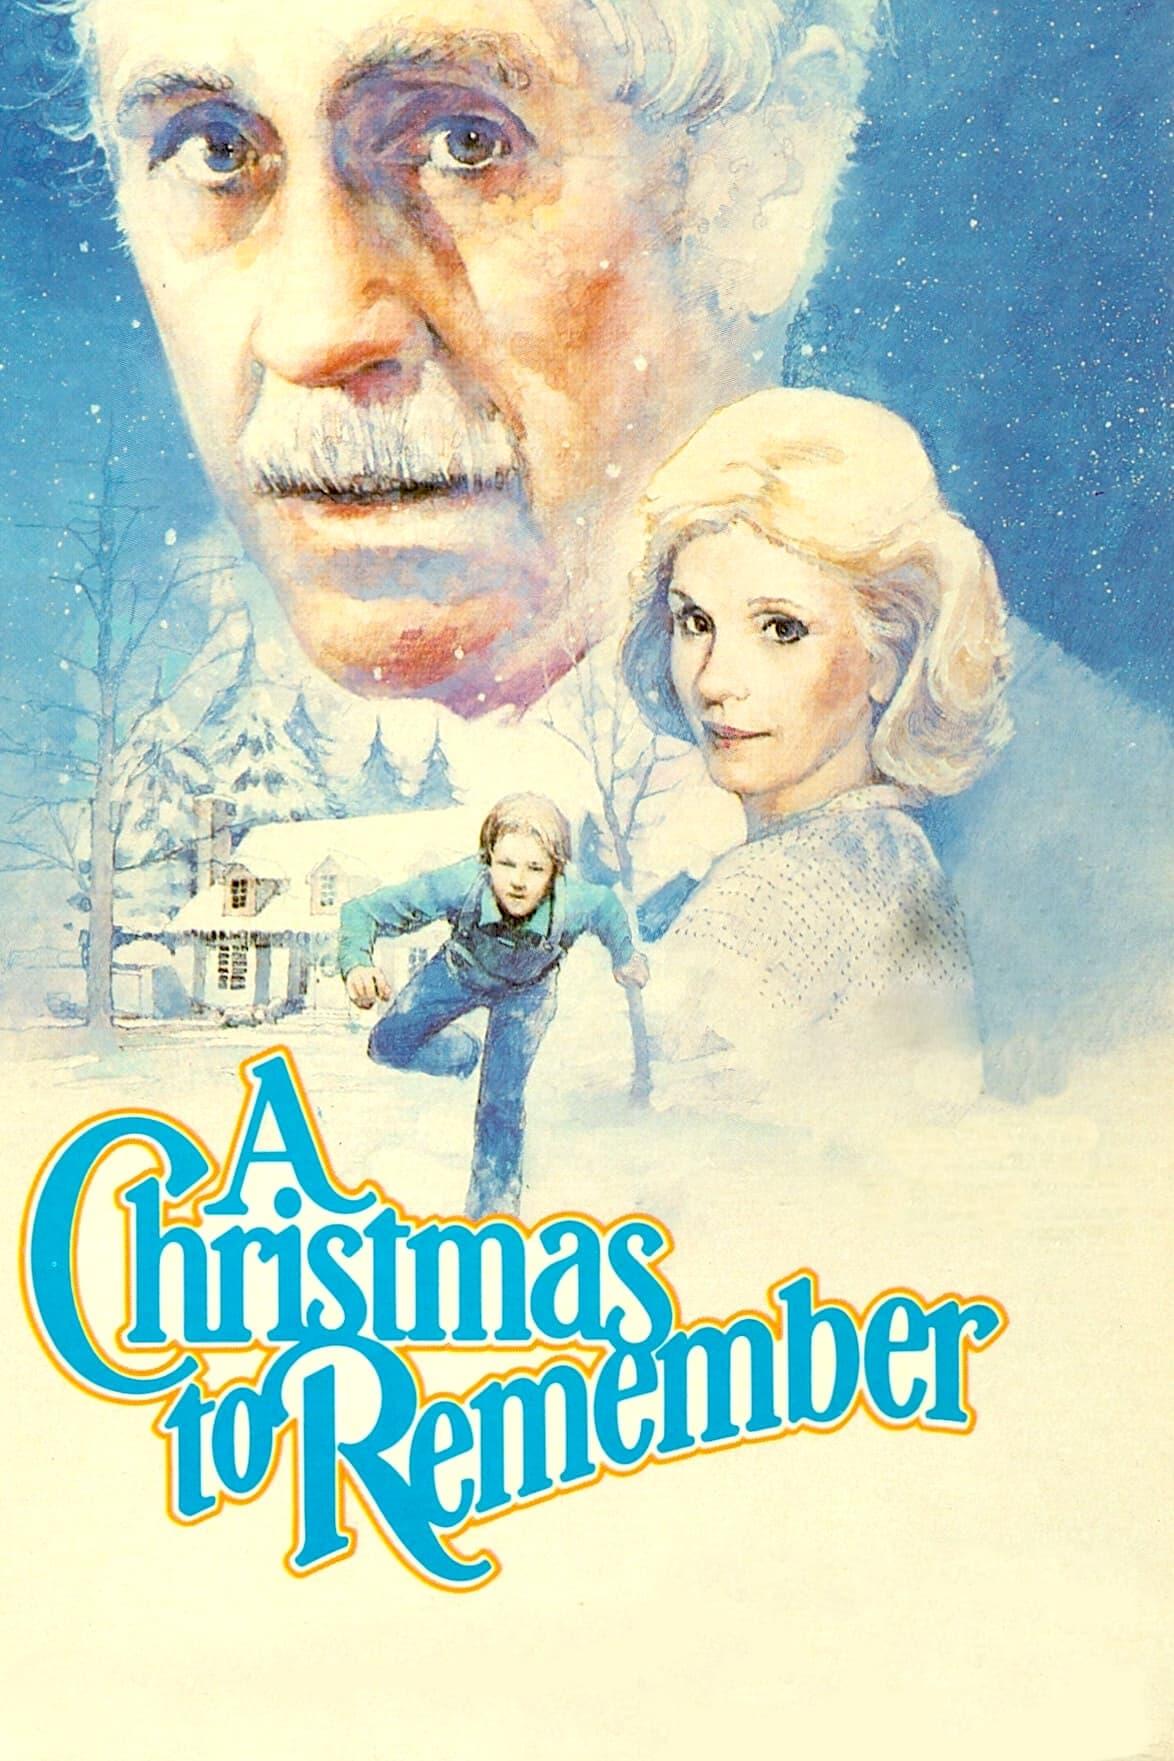 A Christmas to Remember poster